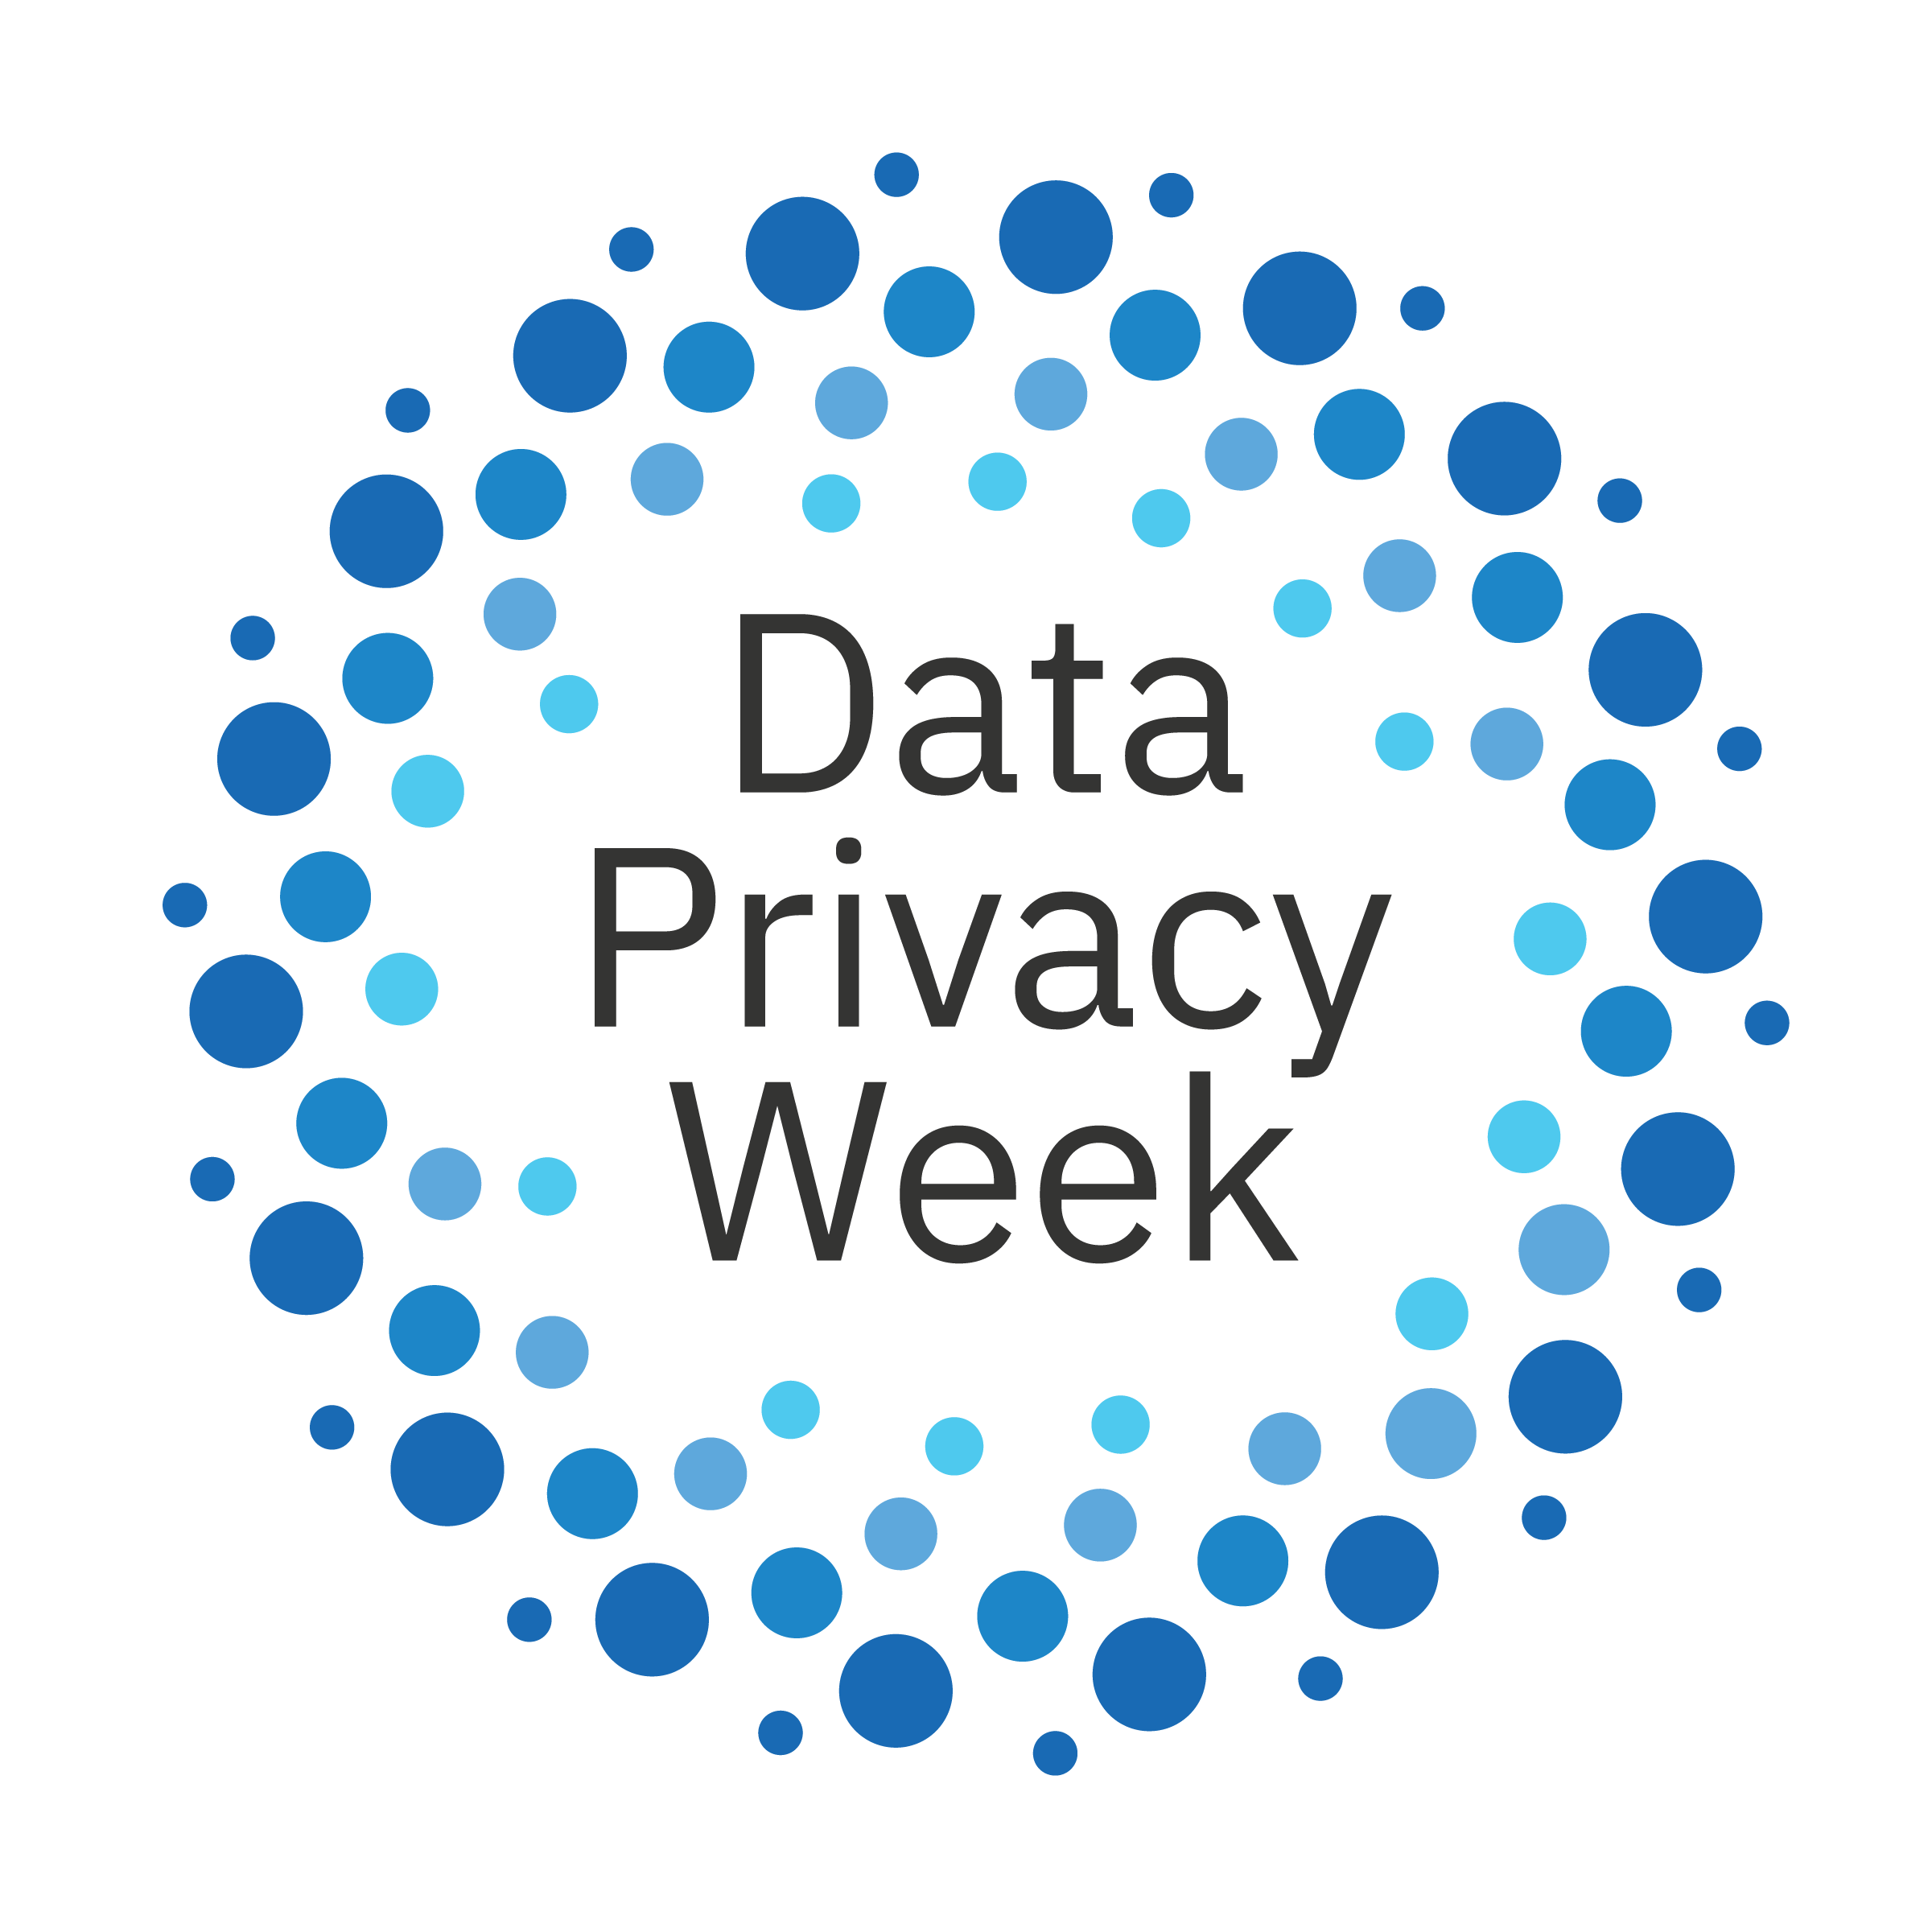 The Data Privacy Week logo